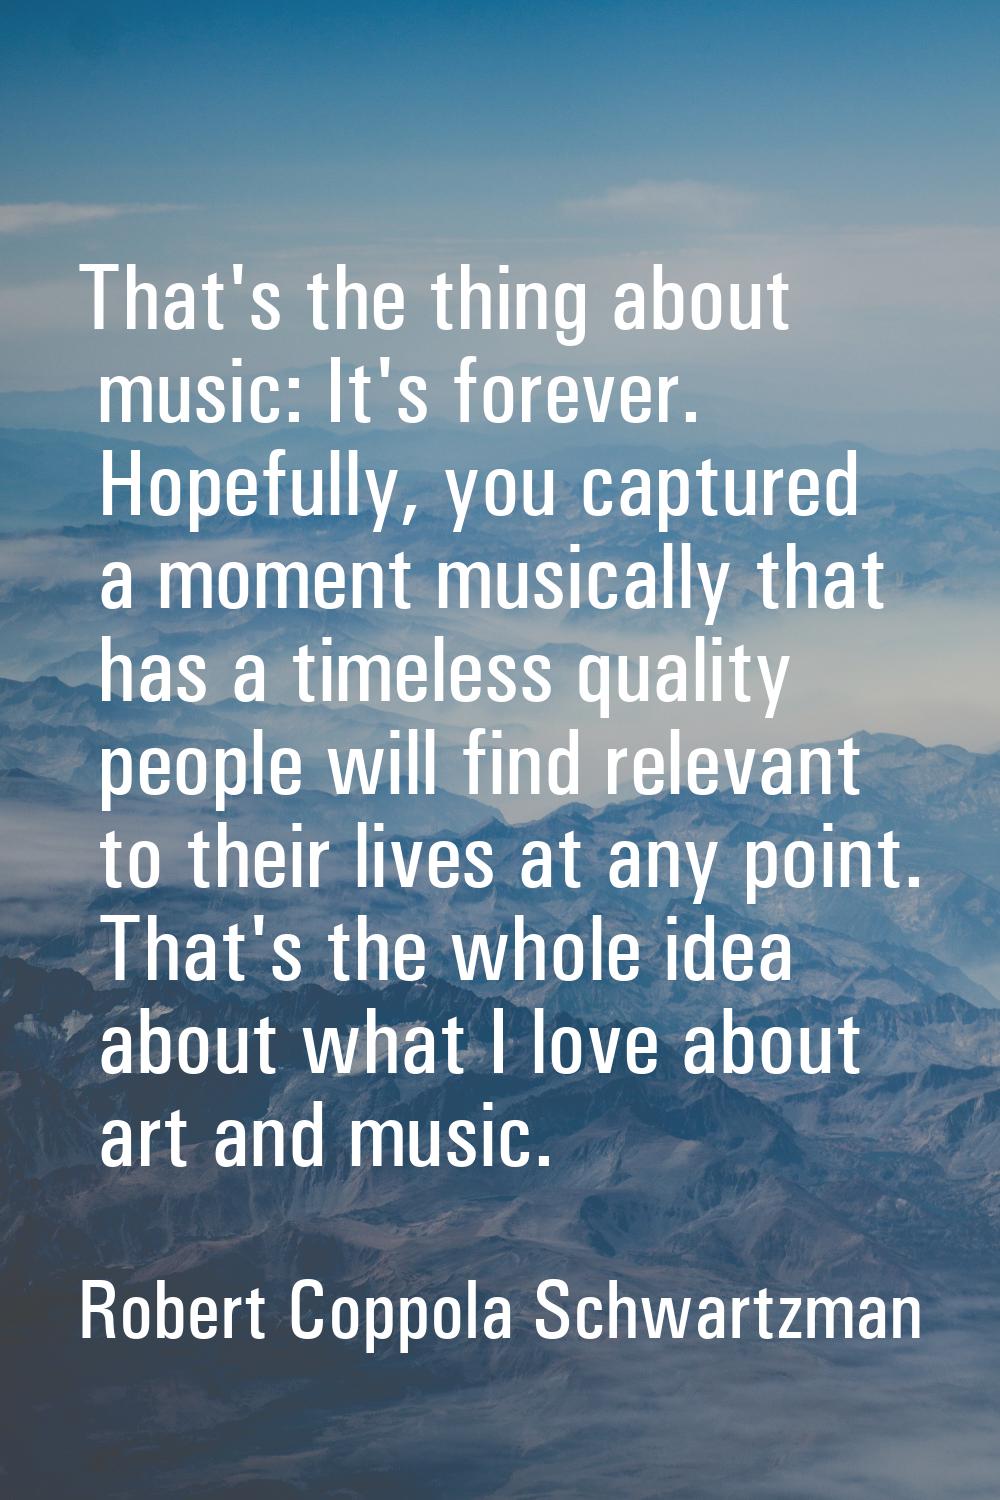 That's the thing about music: It's forever. Hopefully, you captured a moment musically that has a t